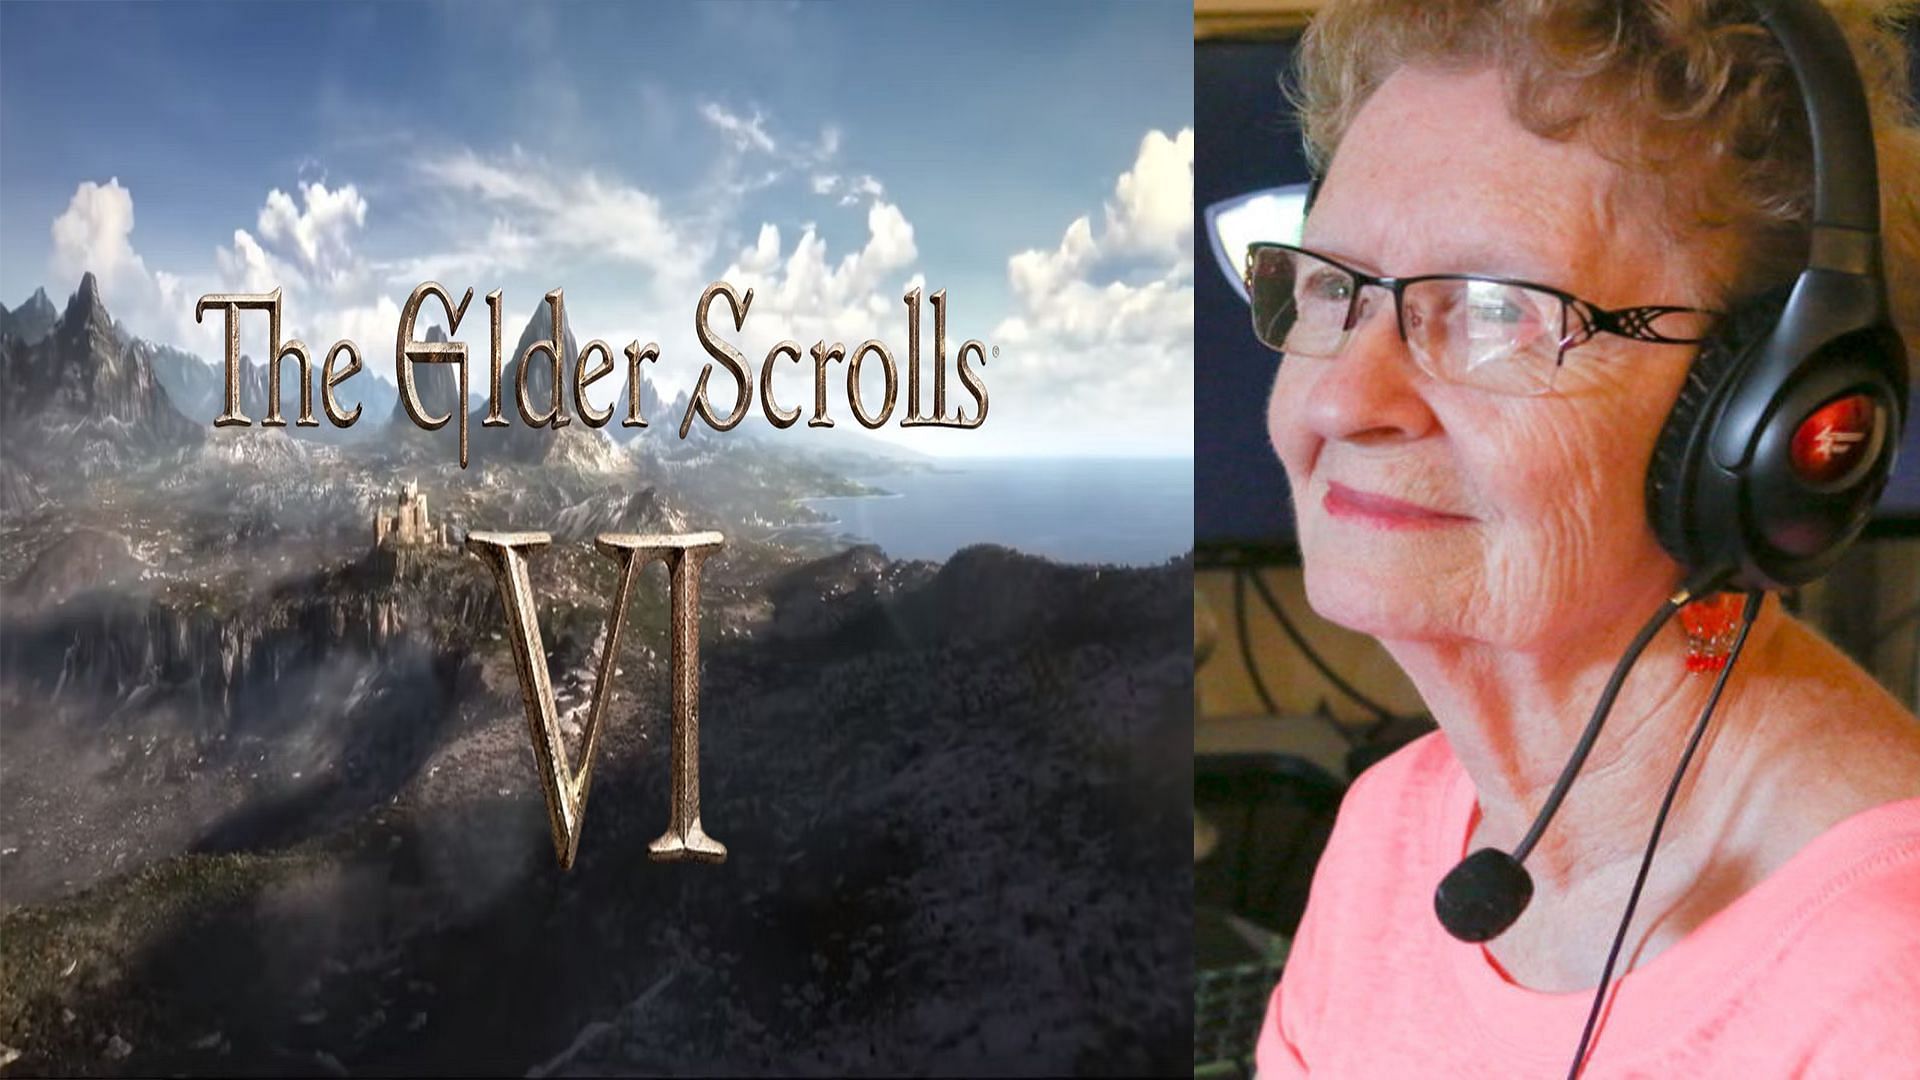 Skyrim Grandma wants The Elder Scrolls 6 to come out soon (Image via Bethesda and Shirley Curry)